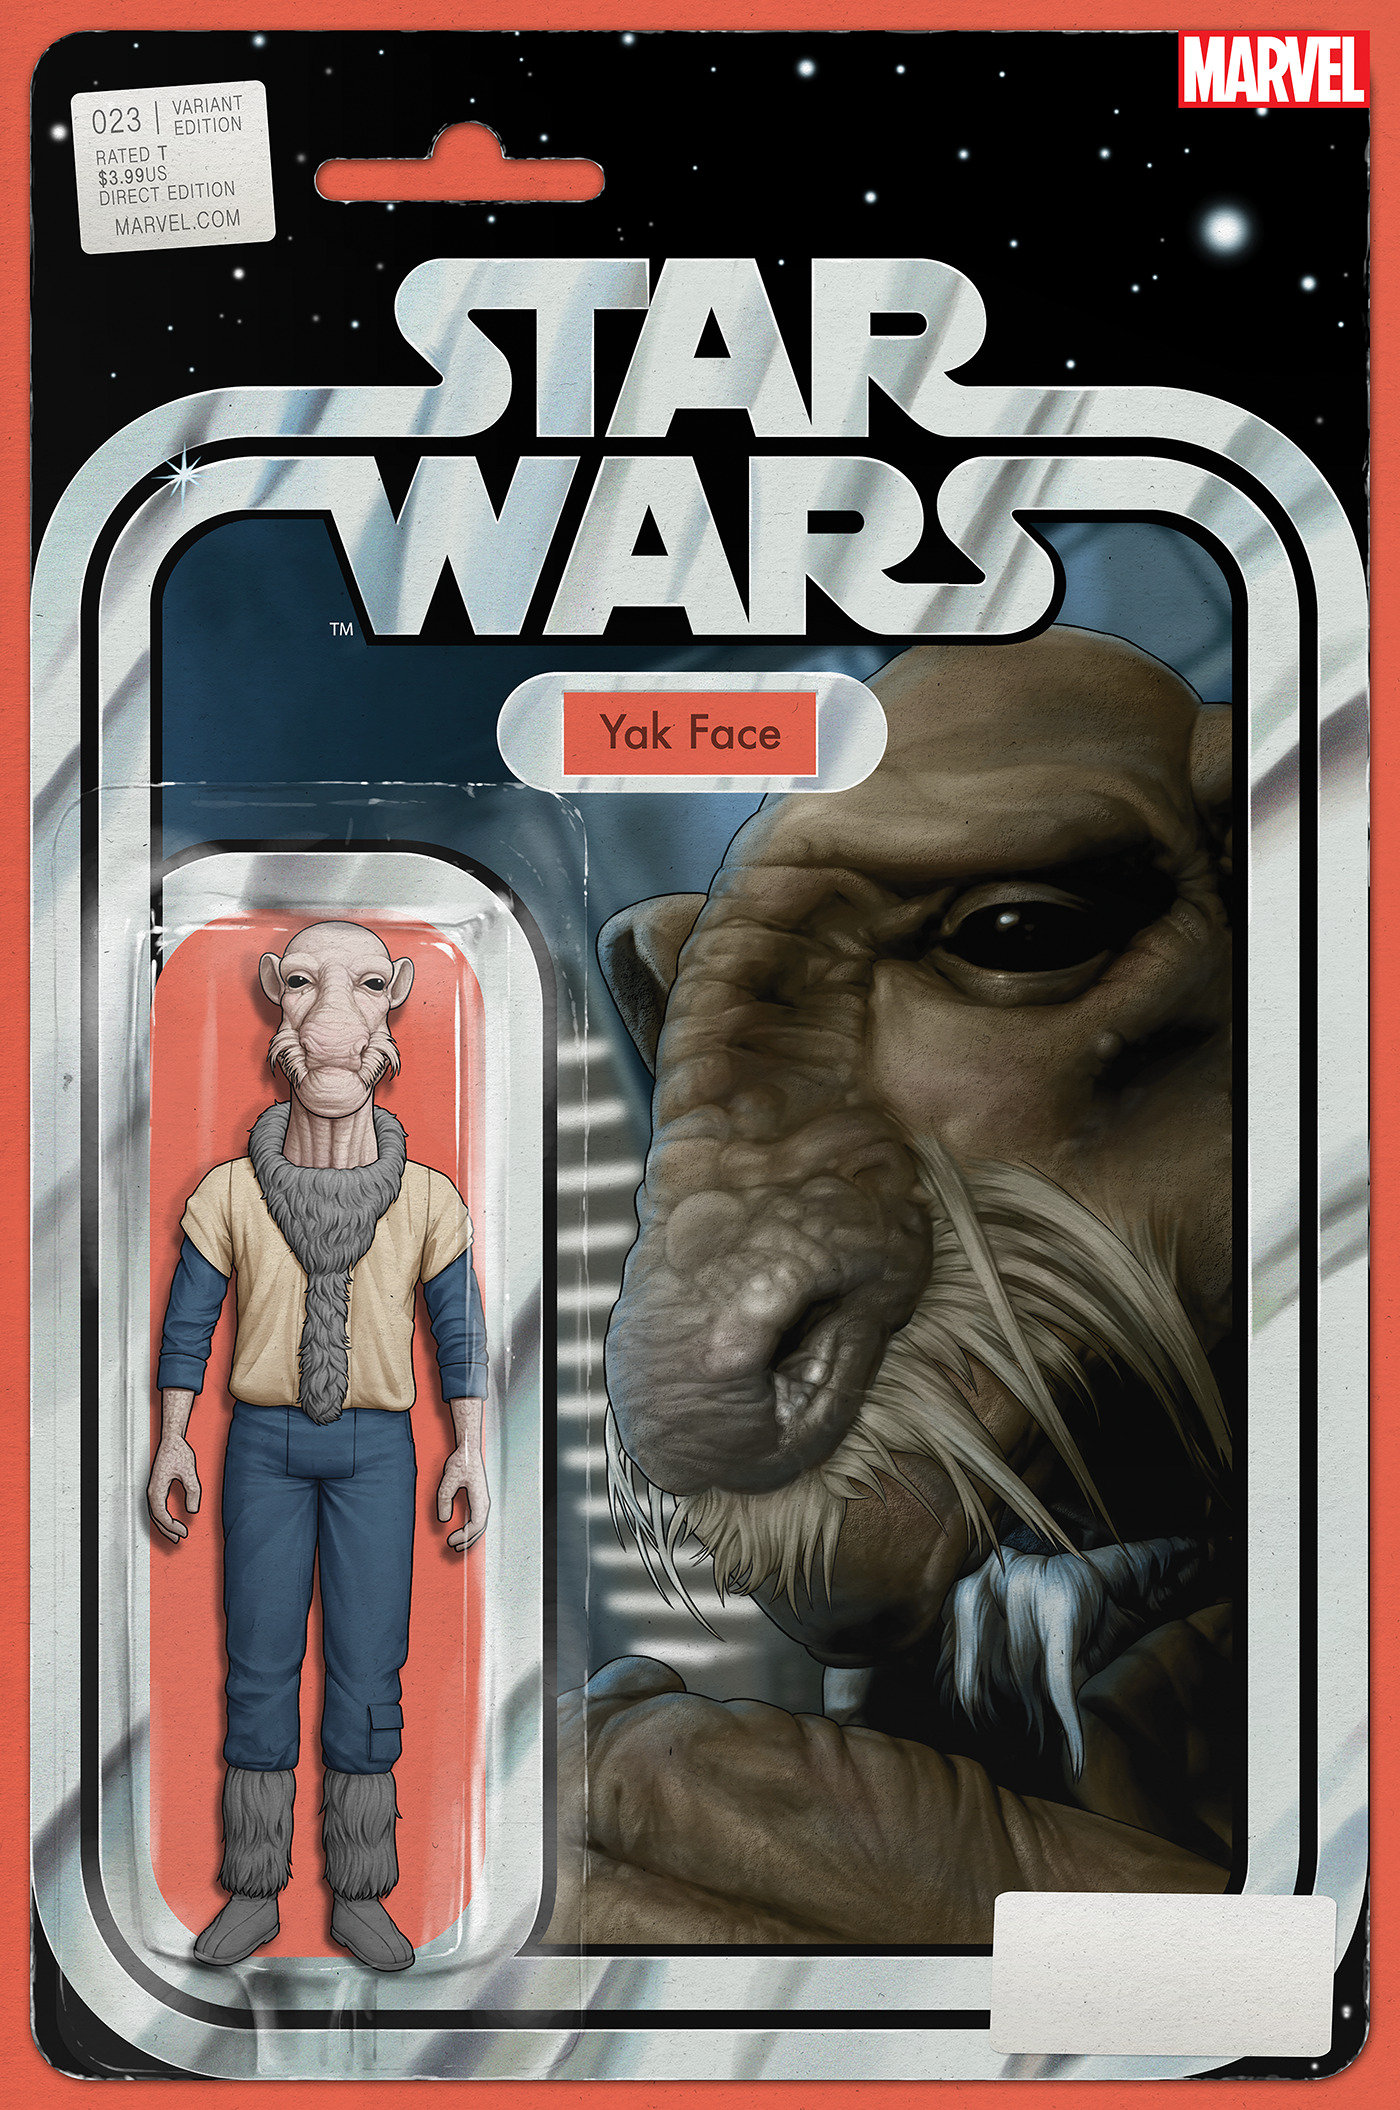 Star Wars #23 ("Yak Face" Action Figure Variant Cover) (20.04.2022)